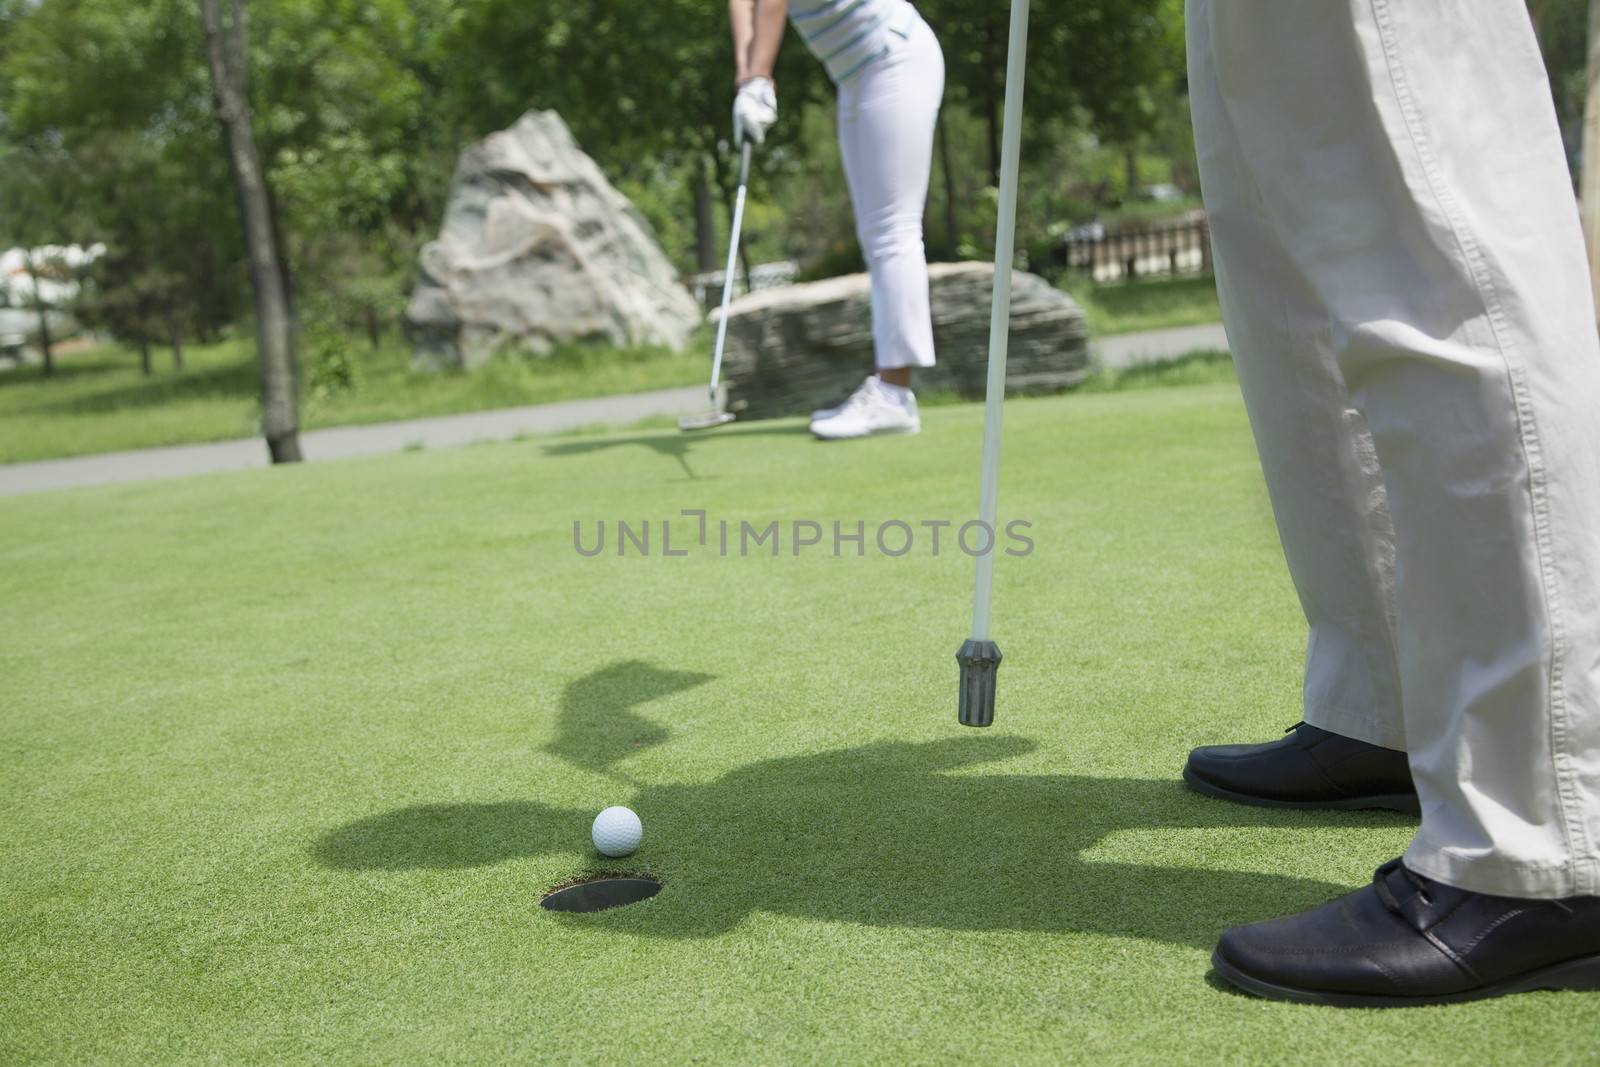 Low section view of man and woman golfing and putting on the golf course